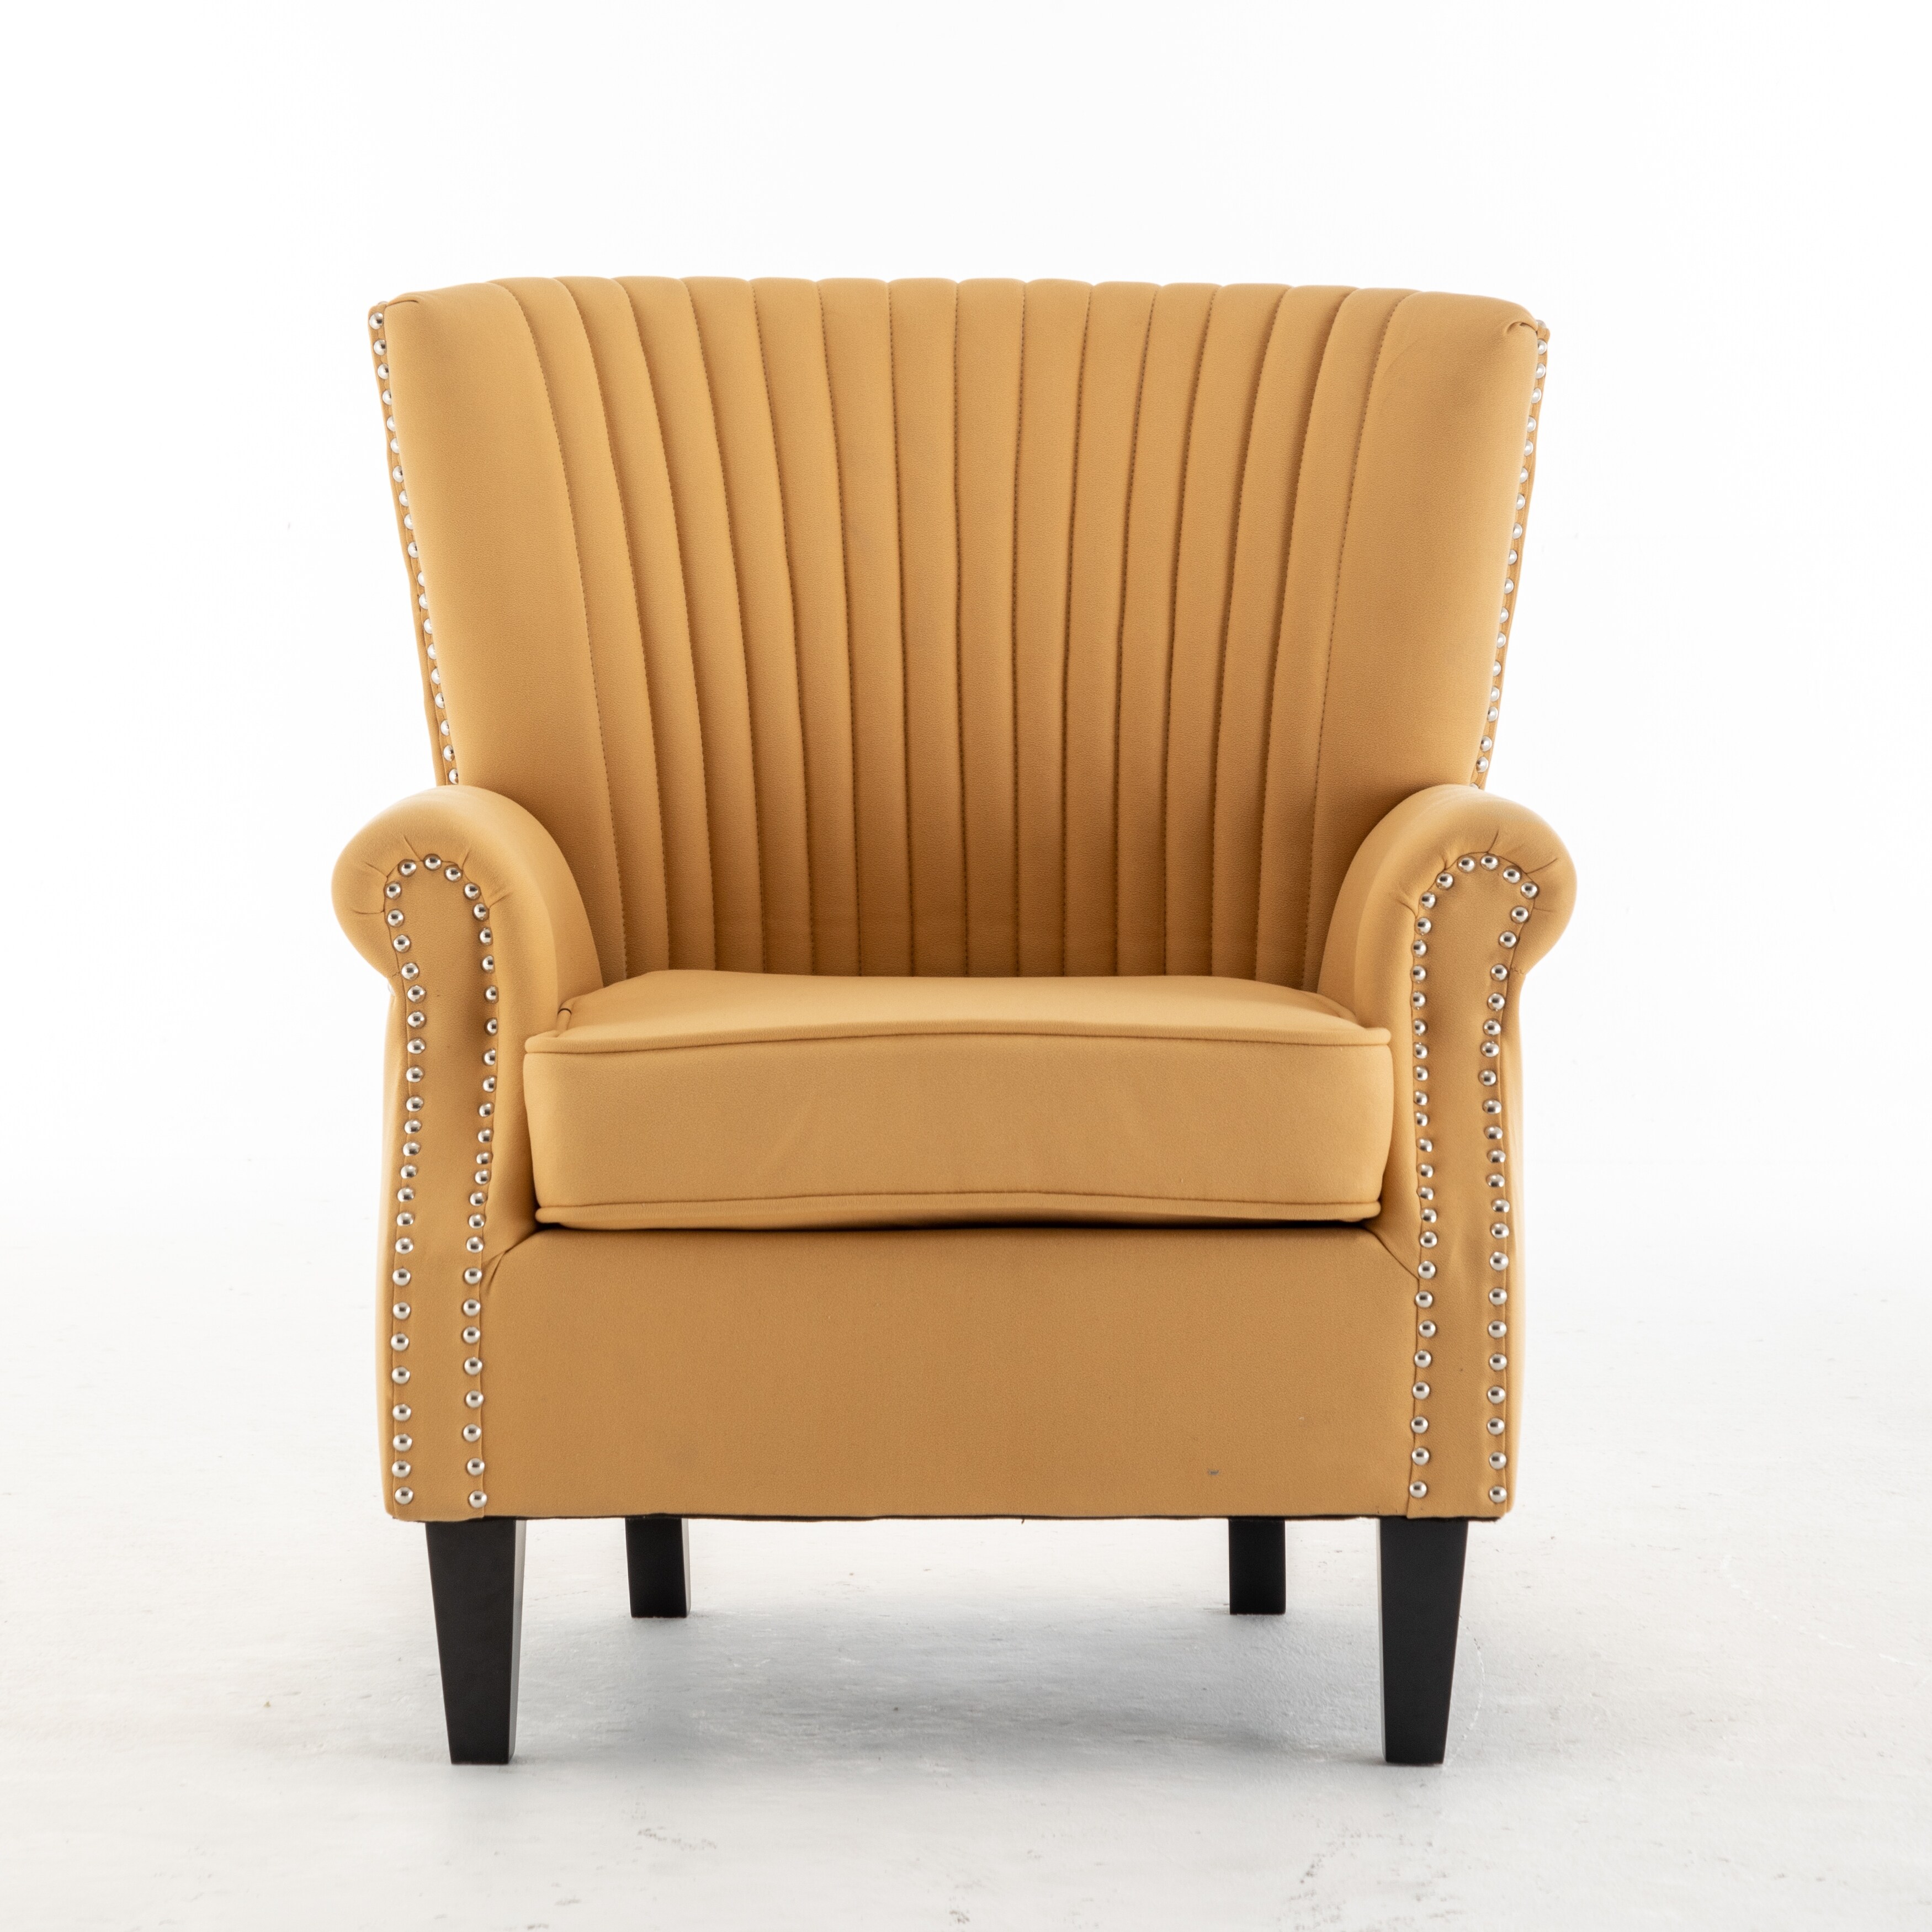 Calnod Accent Chair, Living Room Wingback Chair, Tufted Armchair with Padded Seat, Upholstered Accent Reading Chair,Yellow